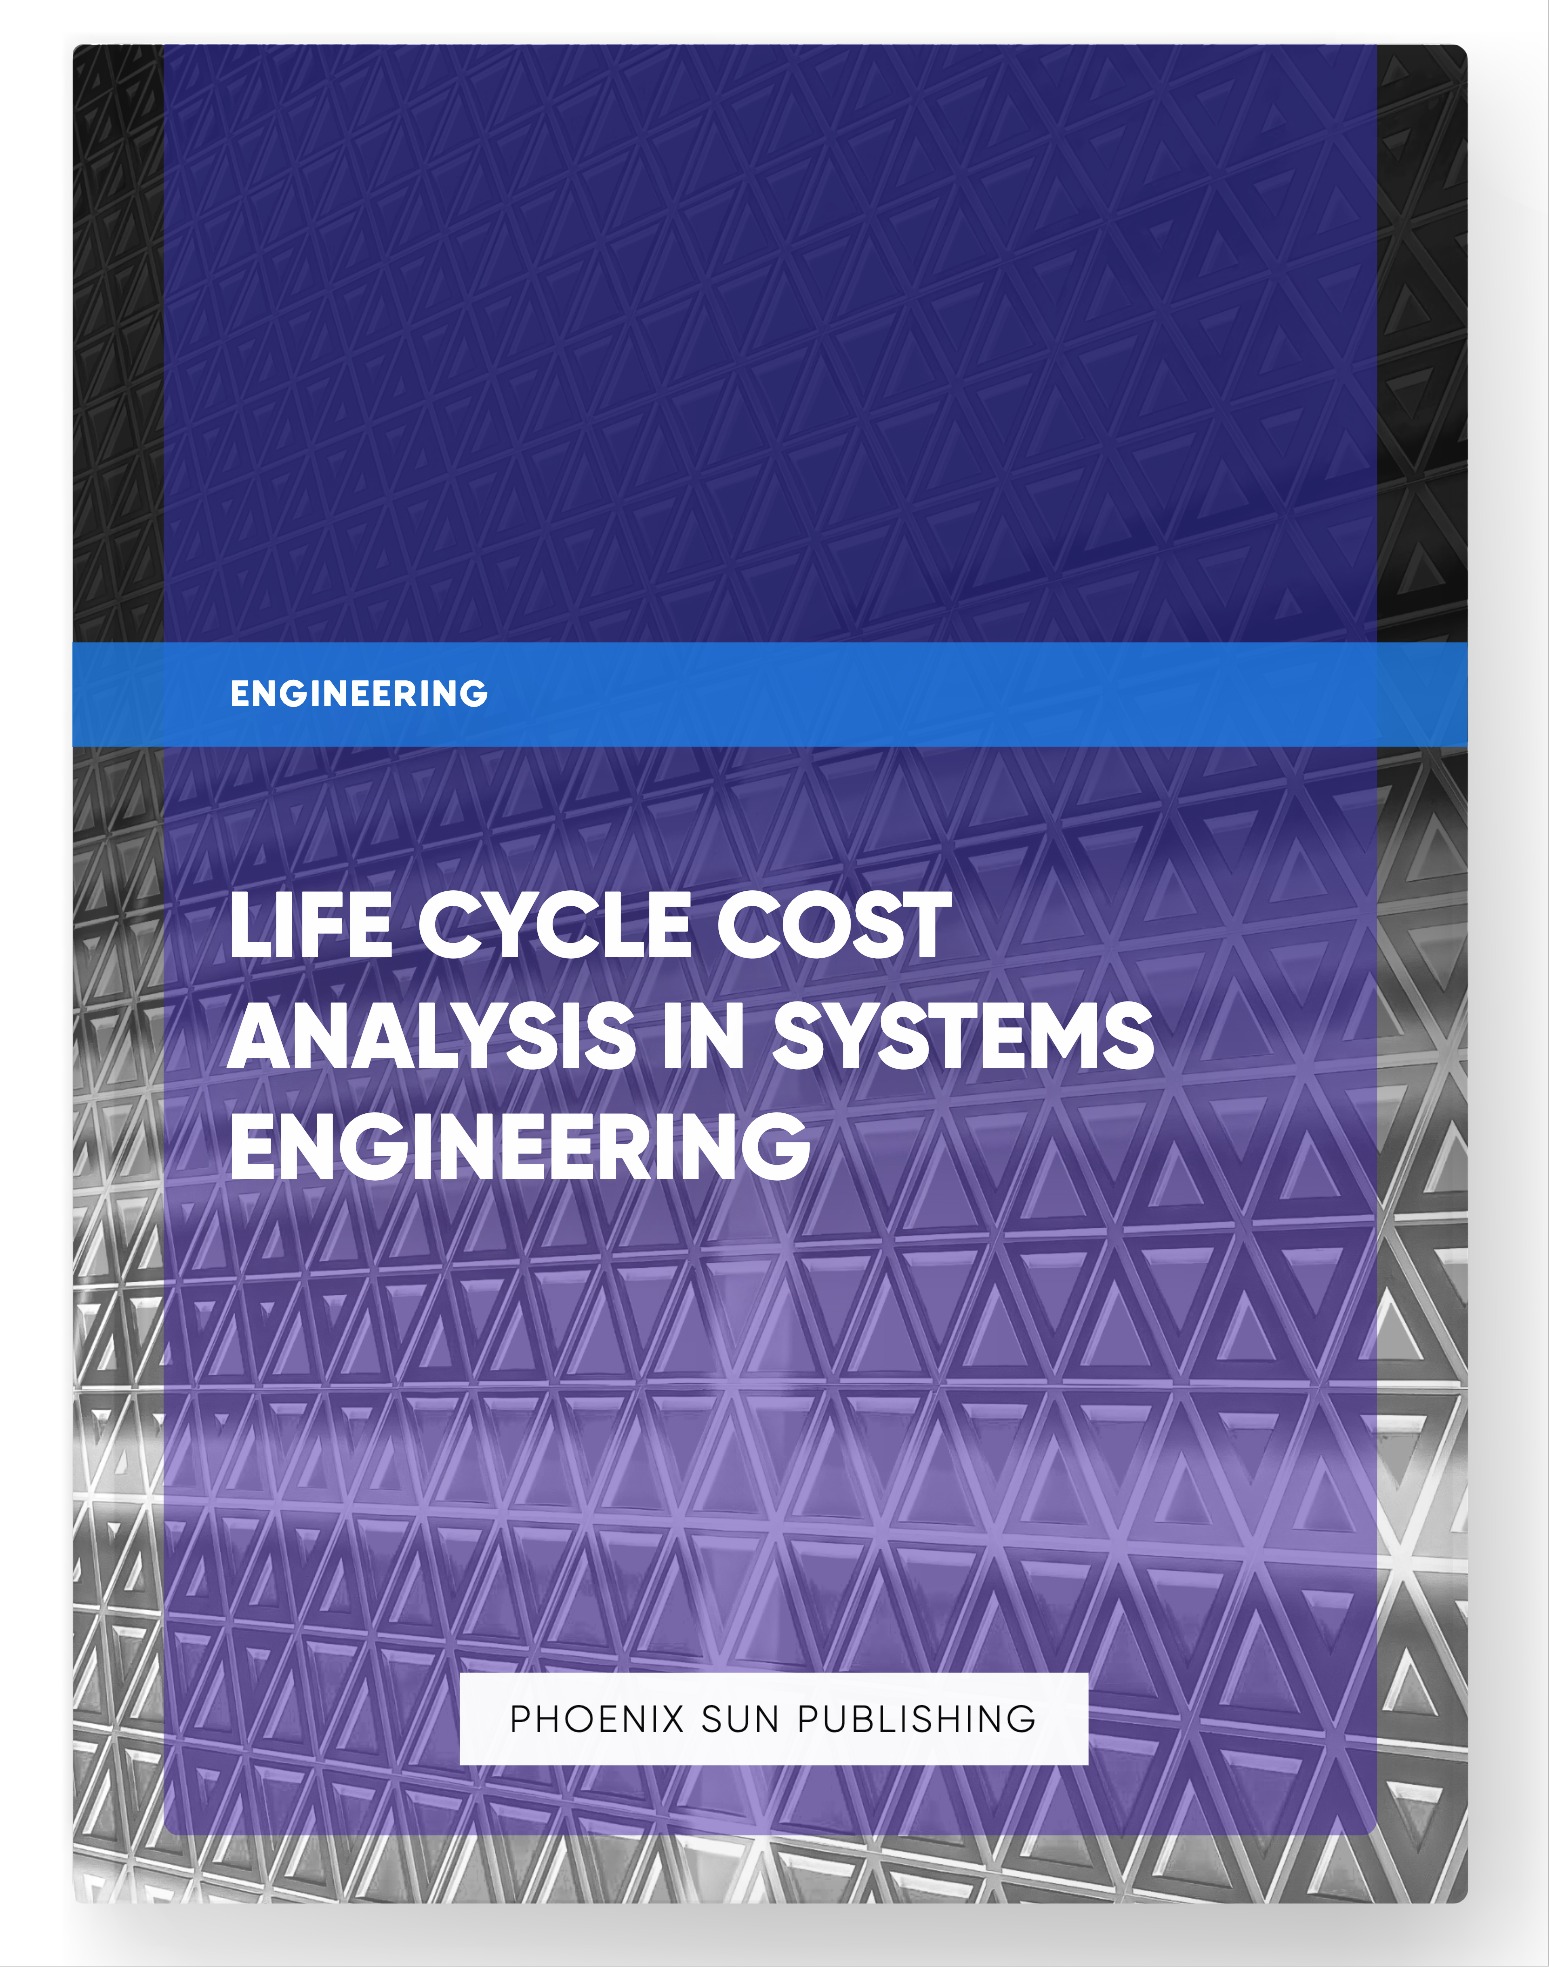 Life Cycle Cost Analysis in Systems Engineering